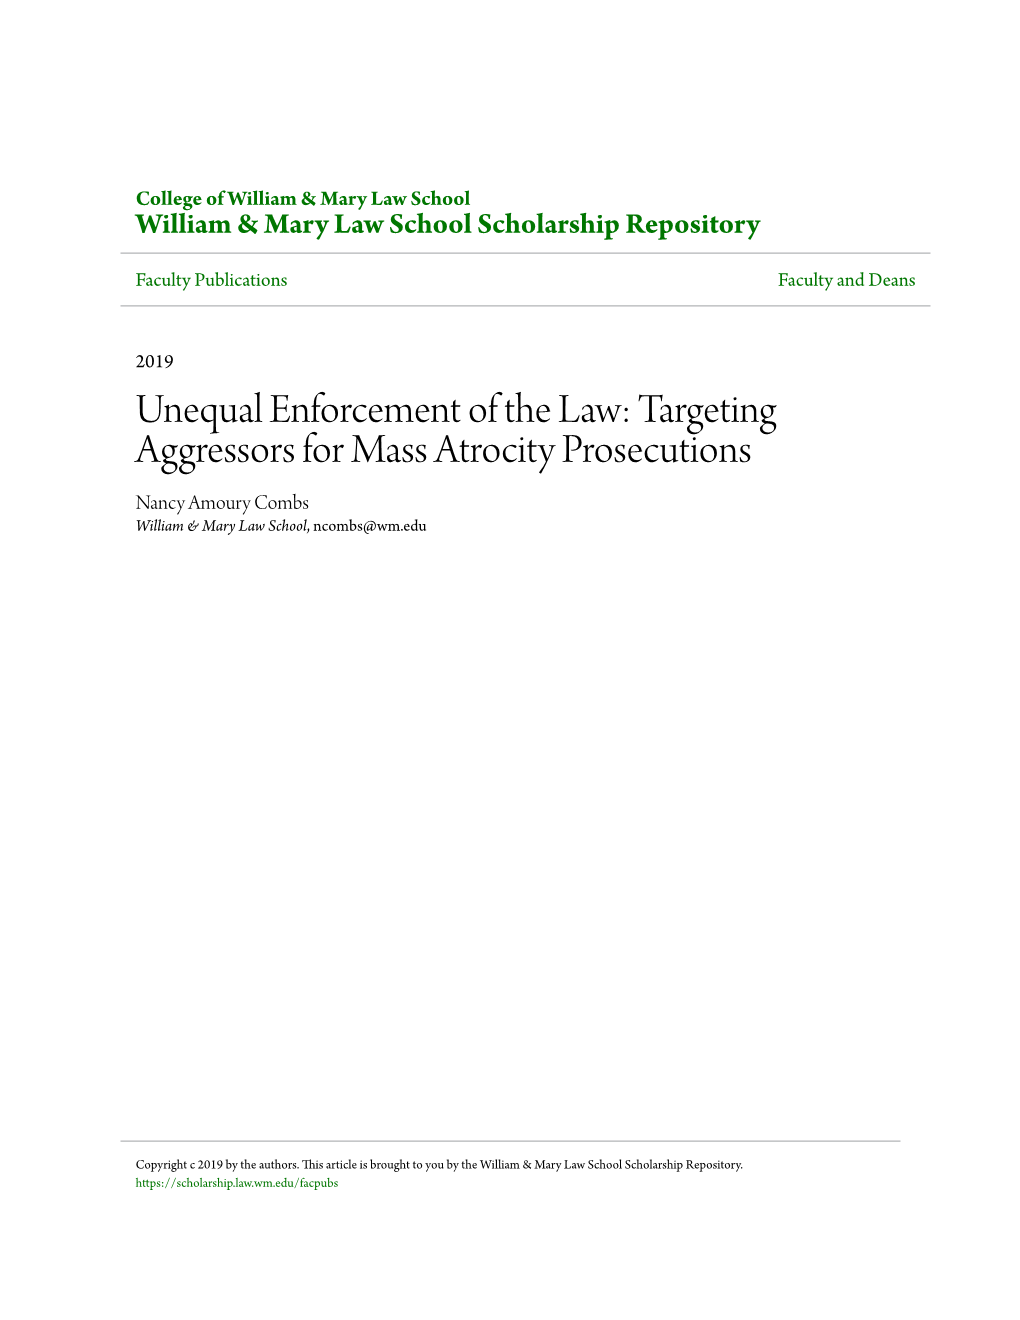 Unequal Enforcement of the Law: Targeting Aggressors for Mass Atrocity Prosecutions Nancy Amoury Combs William & Mary Law School, Ncombs@Wm.Edu